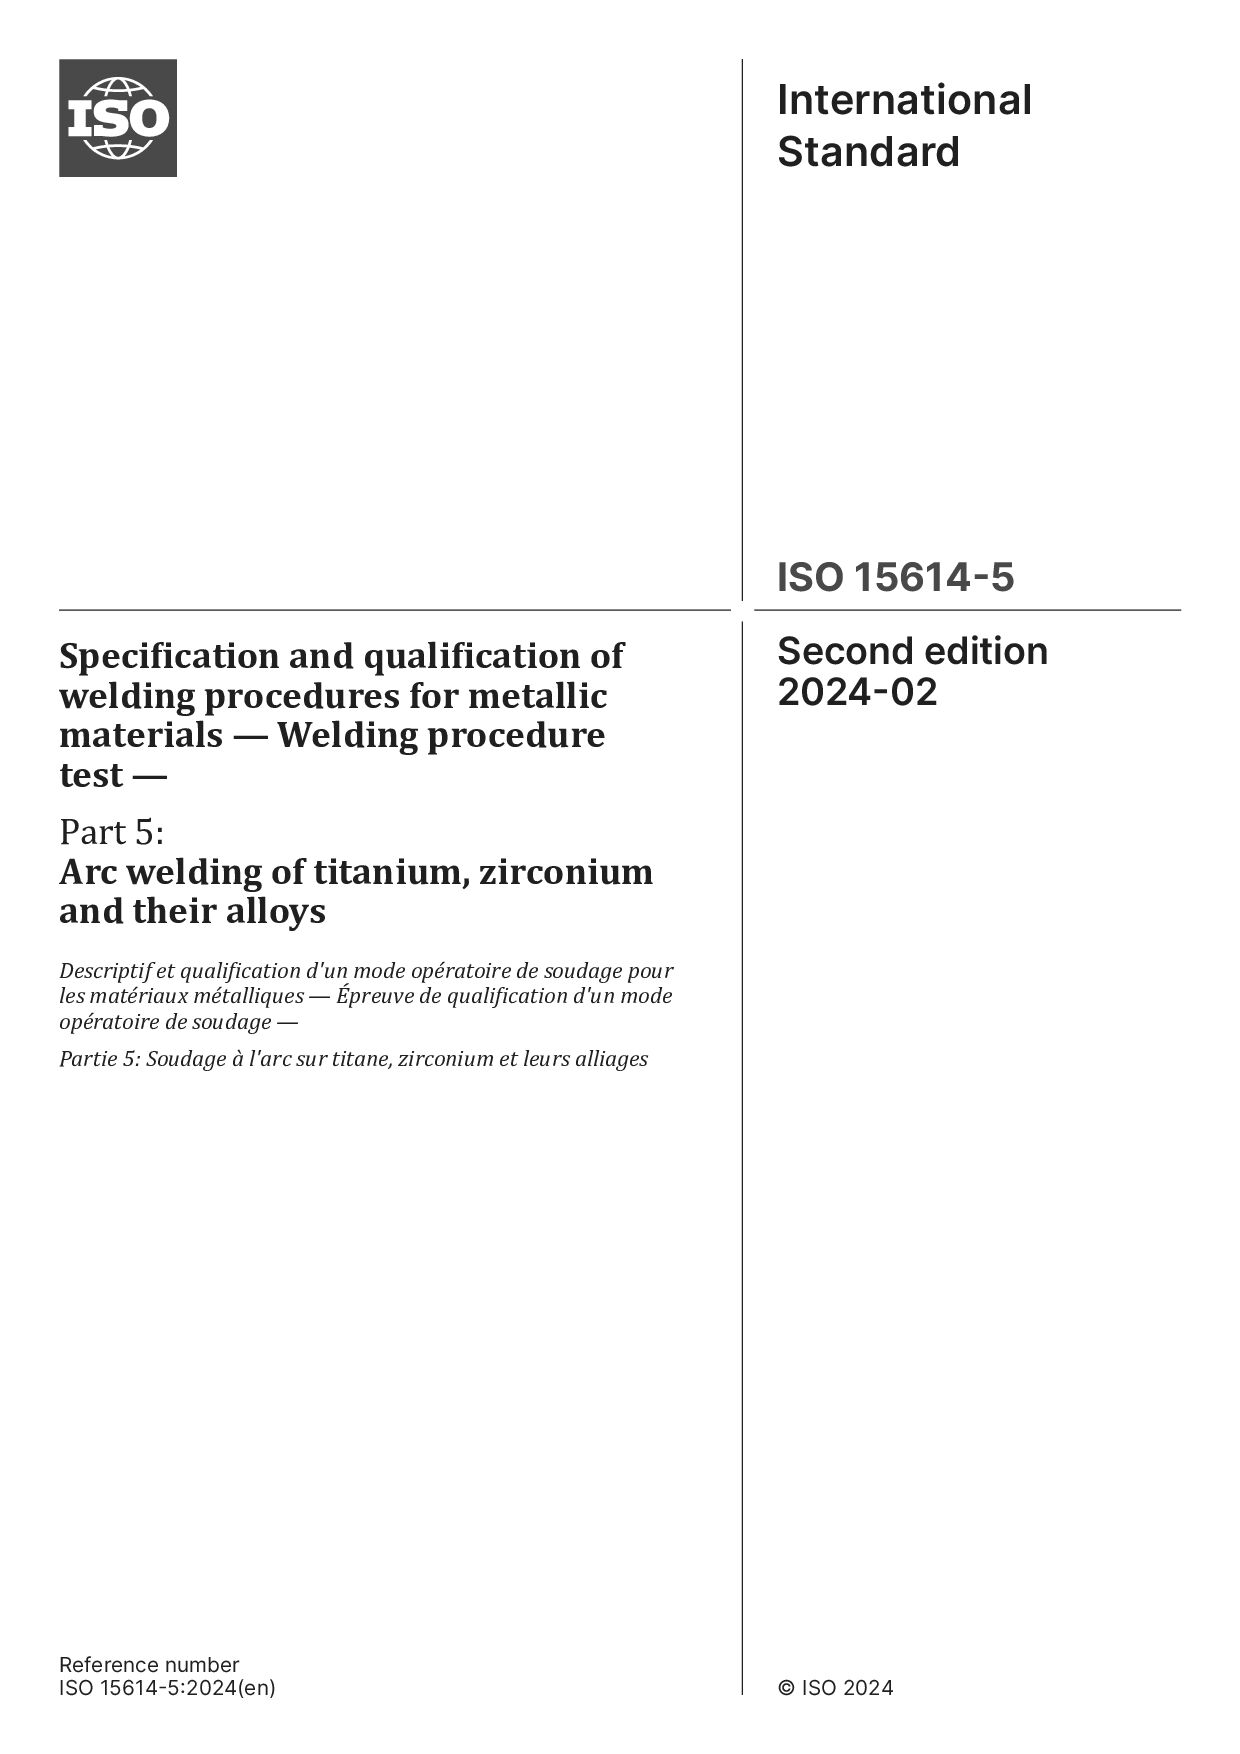 ISO 15614-5:2024